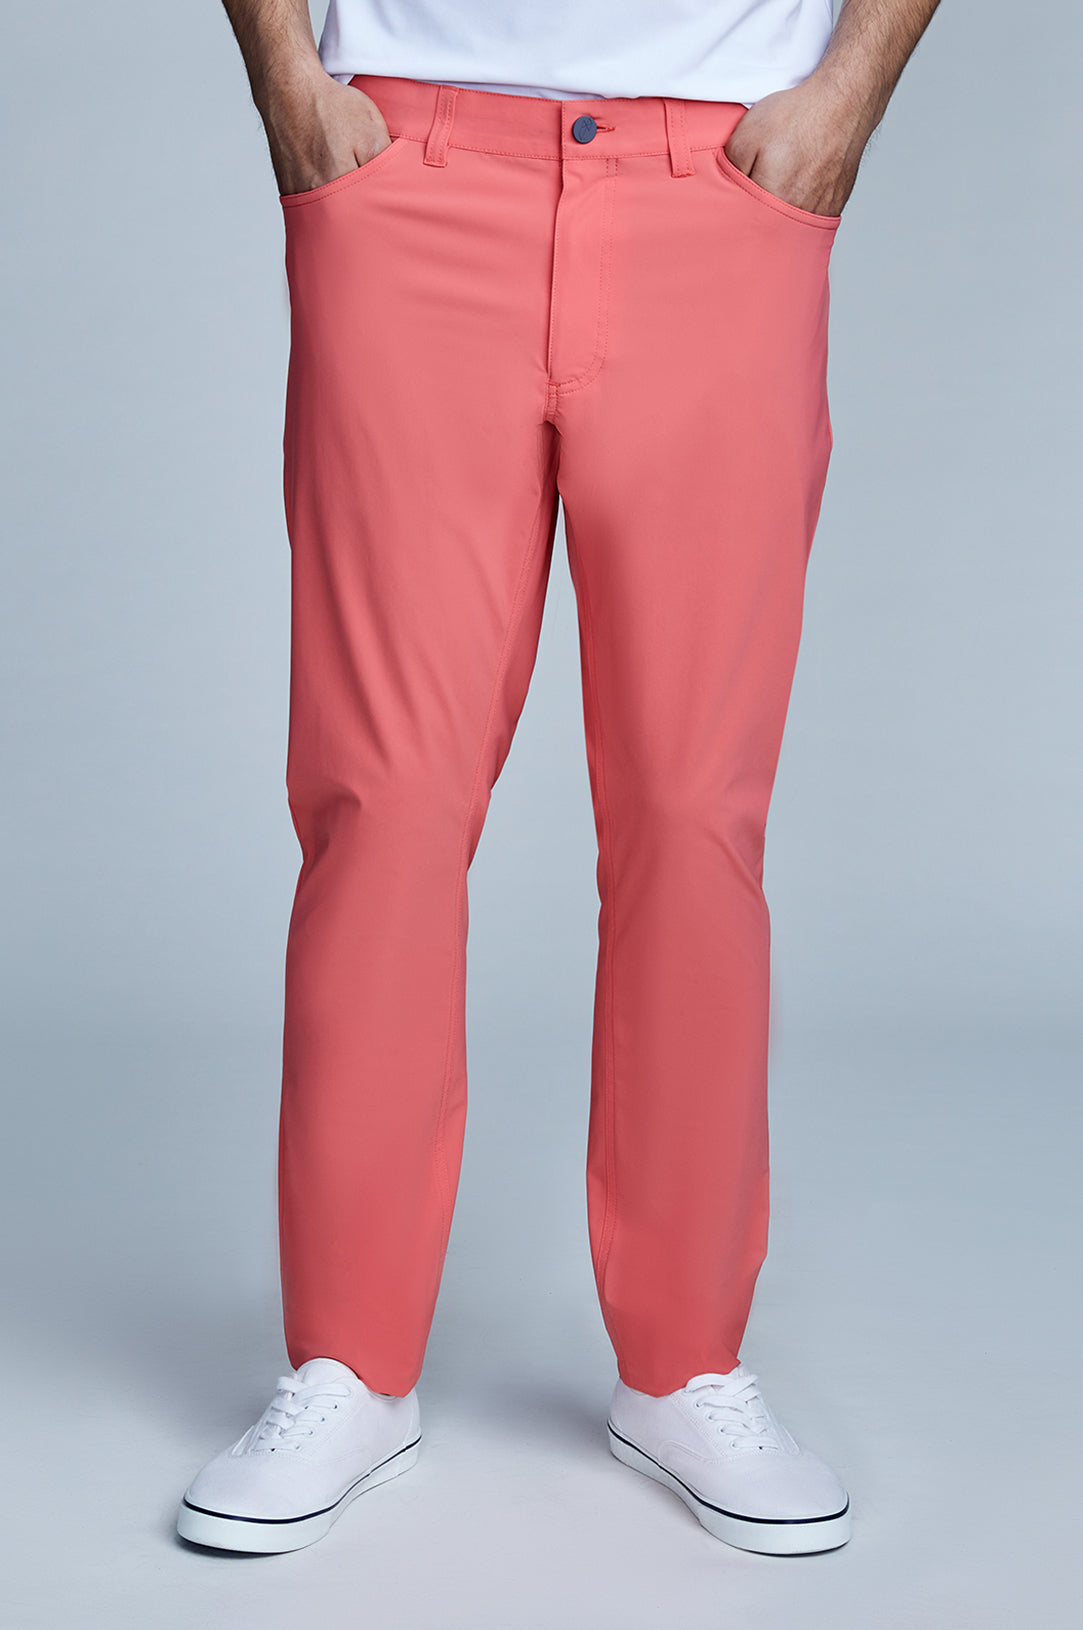 Colours That Flatter Your Skin Tone: For Men | Mens pink pants, Mens  outfits, Pants outfit men